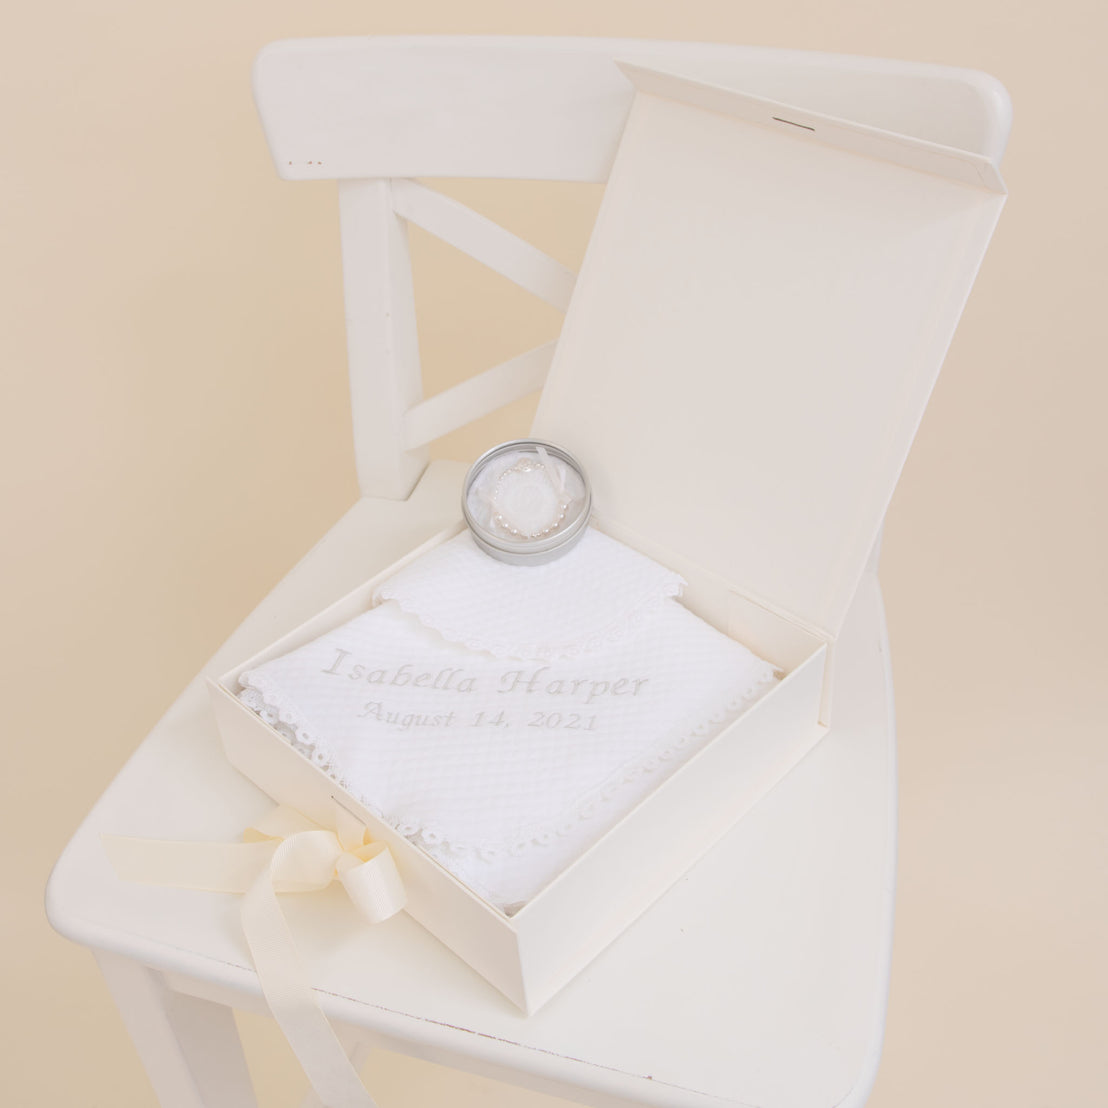 A white memory box on a chair, containing a Baby Beau & Belle Baby Girl Personalized Gift Set—a cushion with a silver rattle and an embroidered baby blanket reading "Isabella Harper, August 15, 2021.